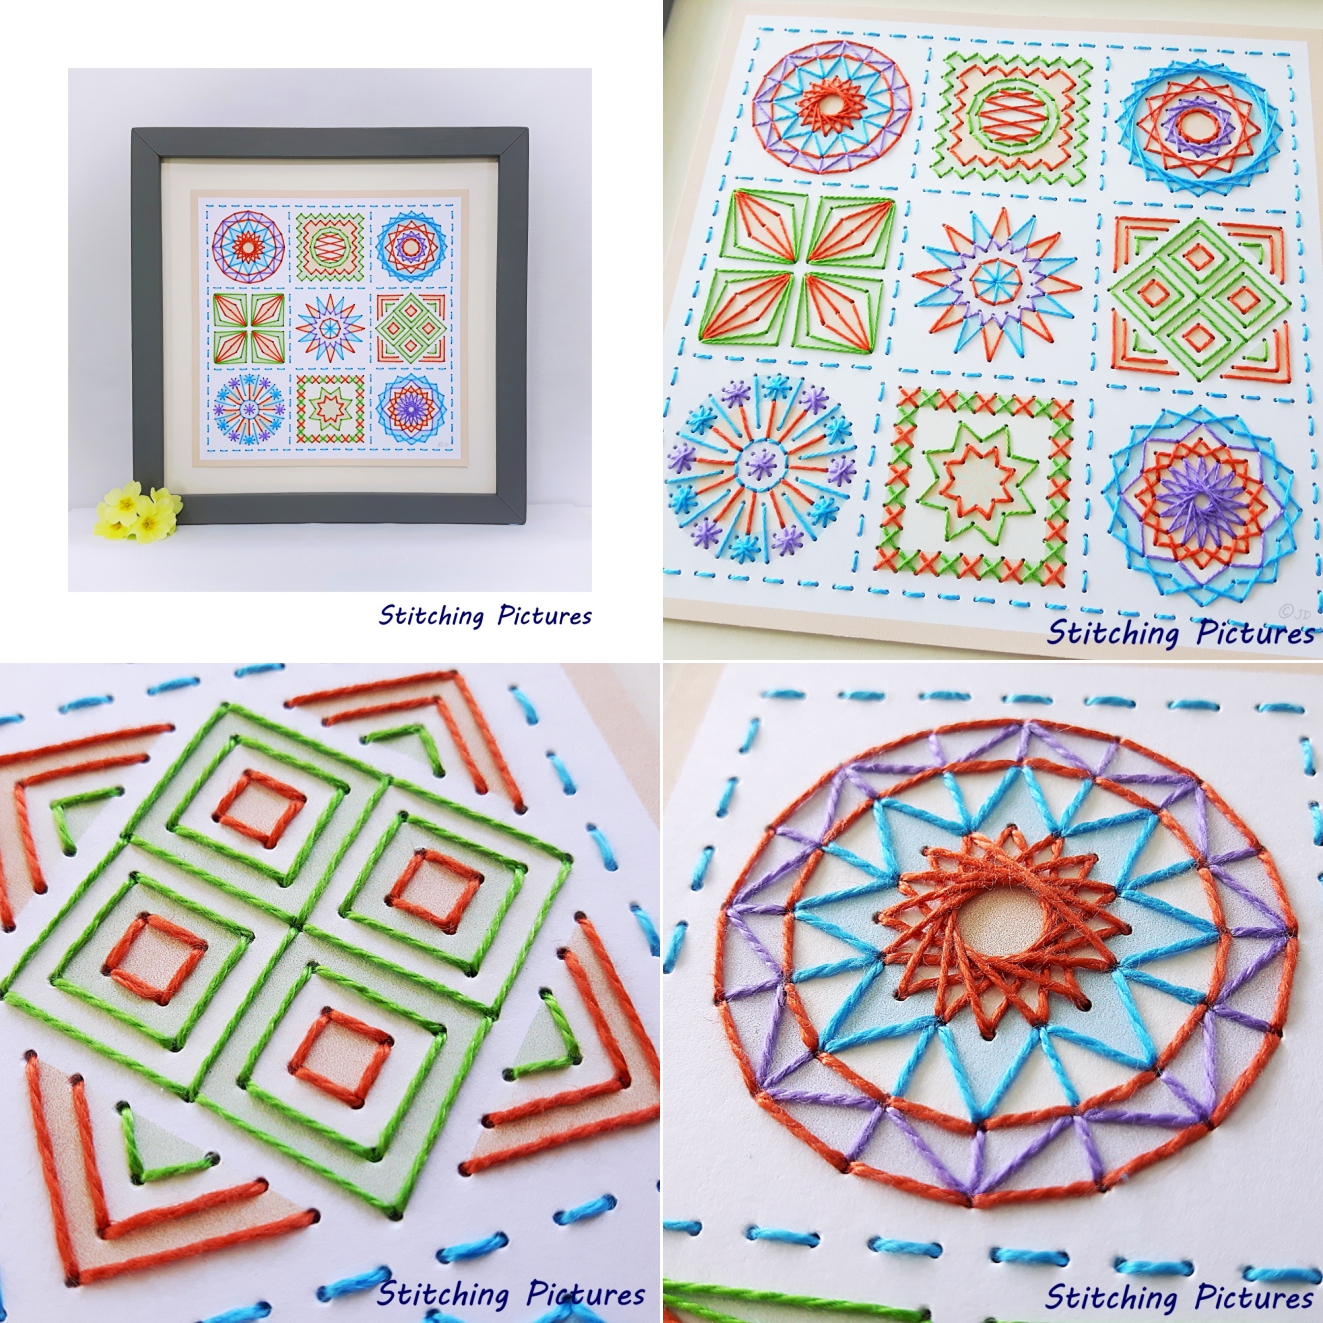 Embroidery Sampler Patterns Free Try Before You Buy With My Free To Download And Print Stitching On